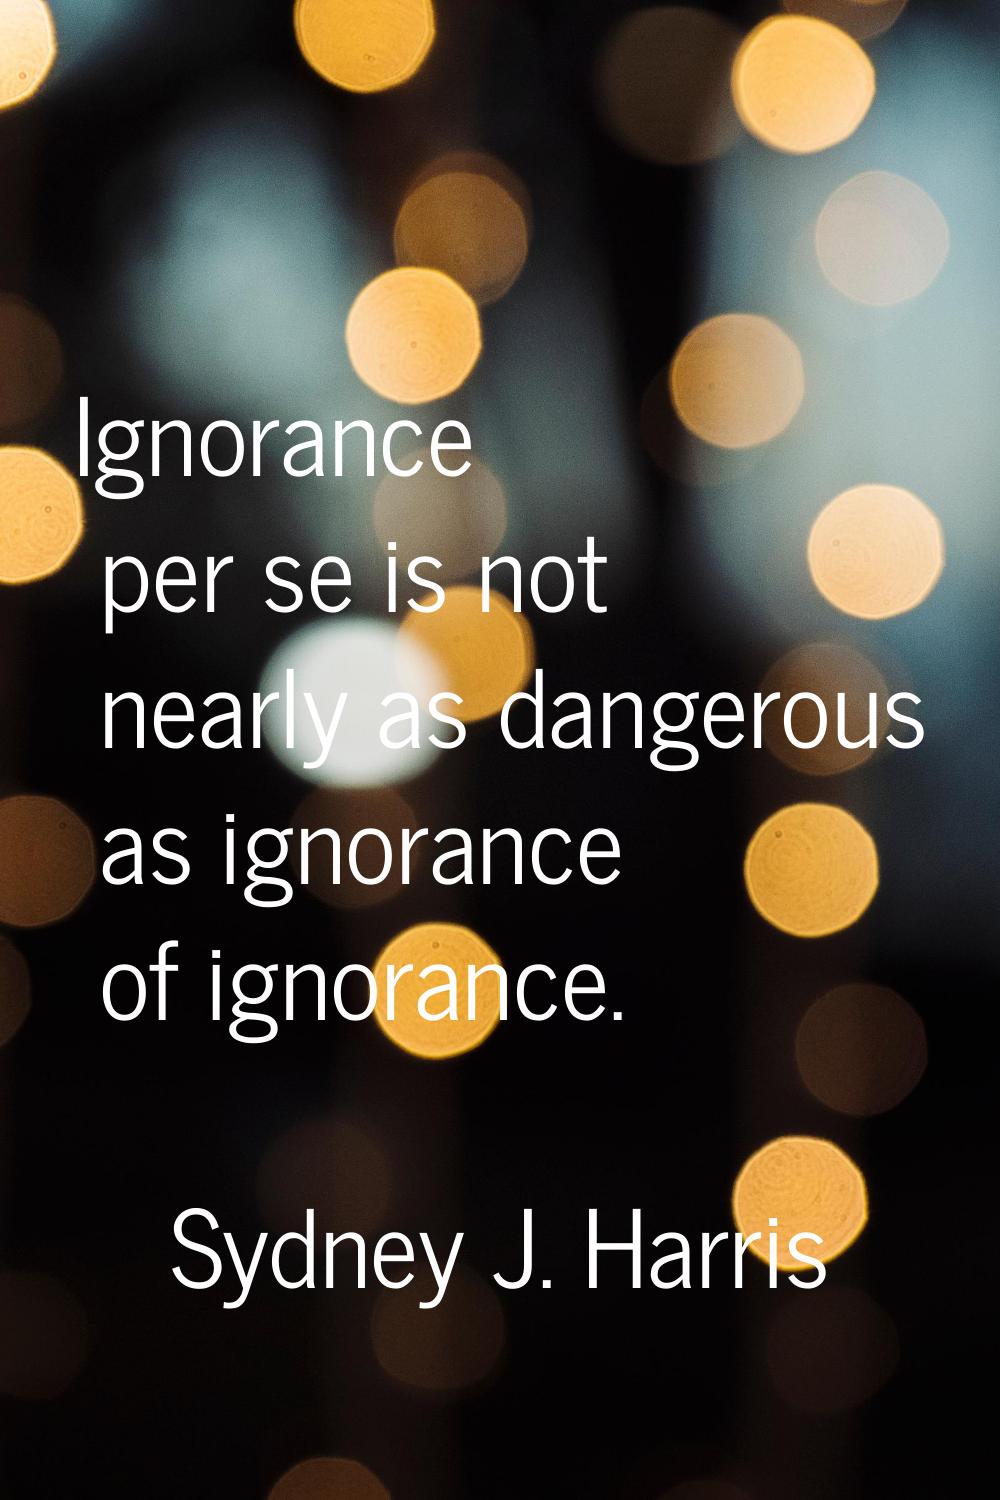 Ignorance per se is not nearly as dangerous as ignorance of ignorance.